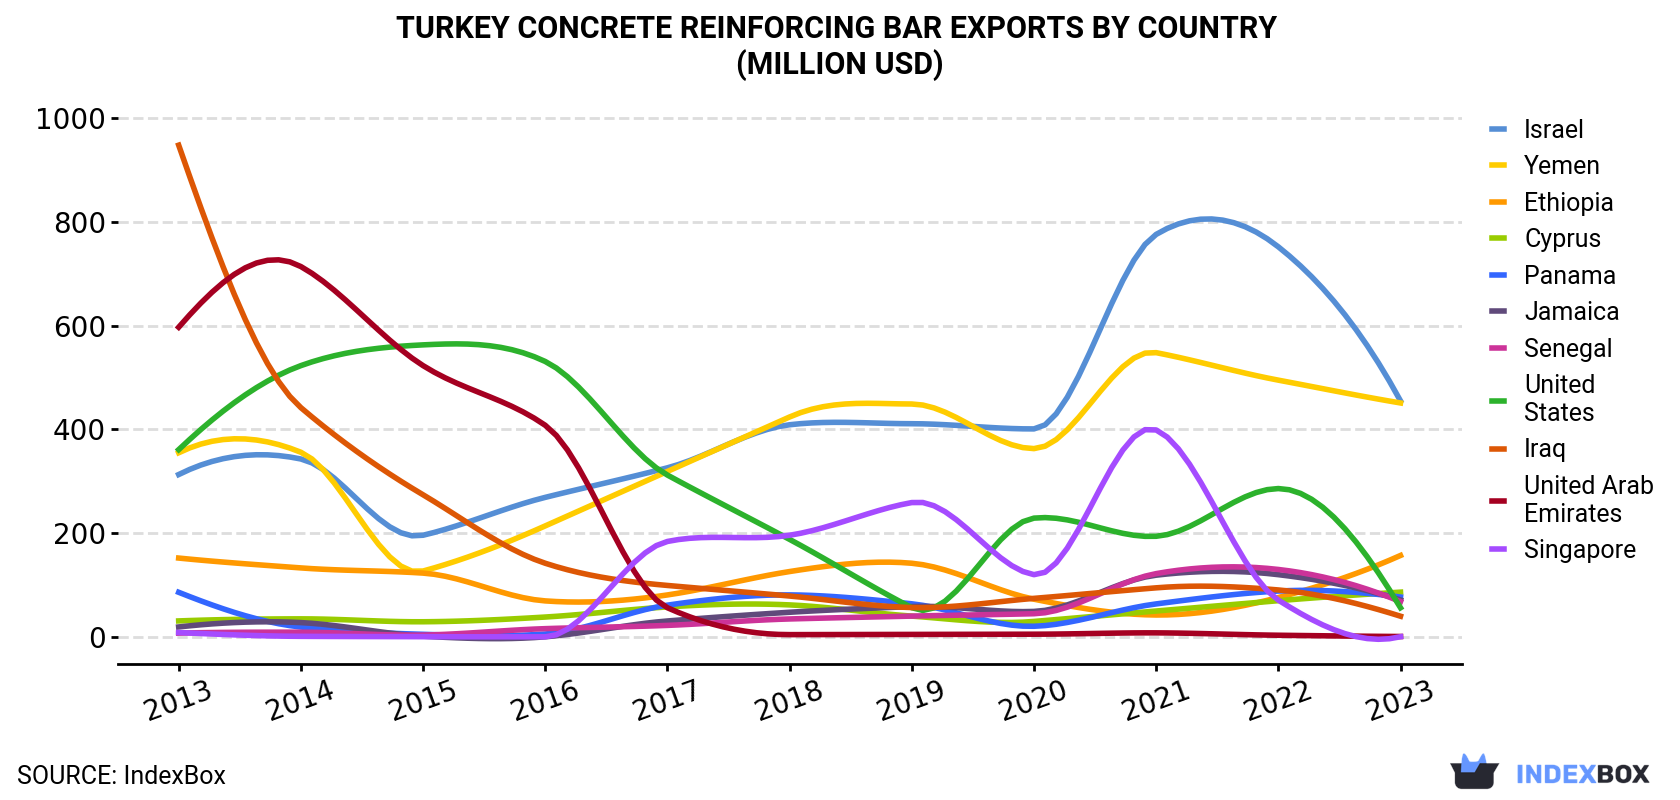 Turkey Concrete Reinforcing Bar Exports By Country (Million USD)